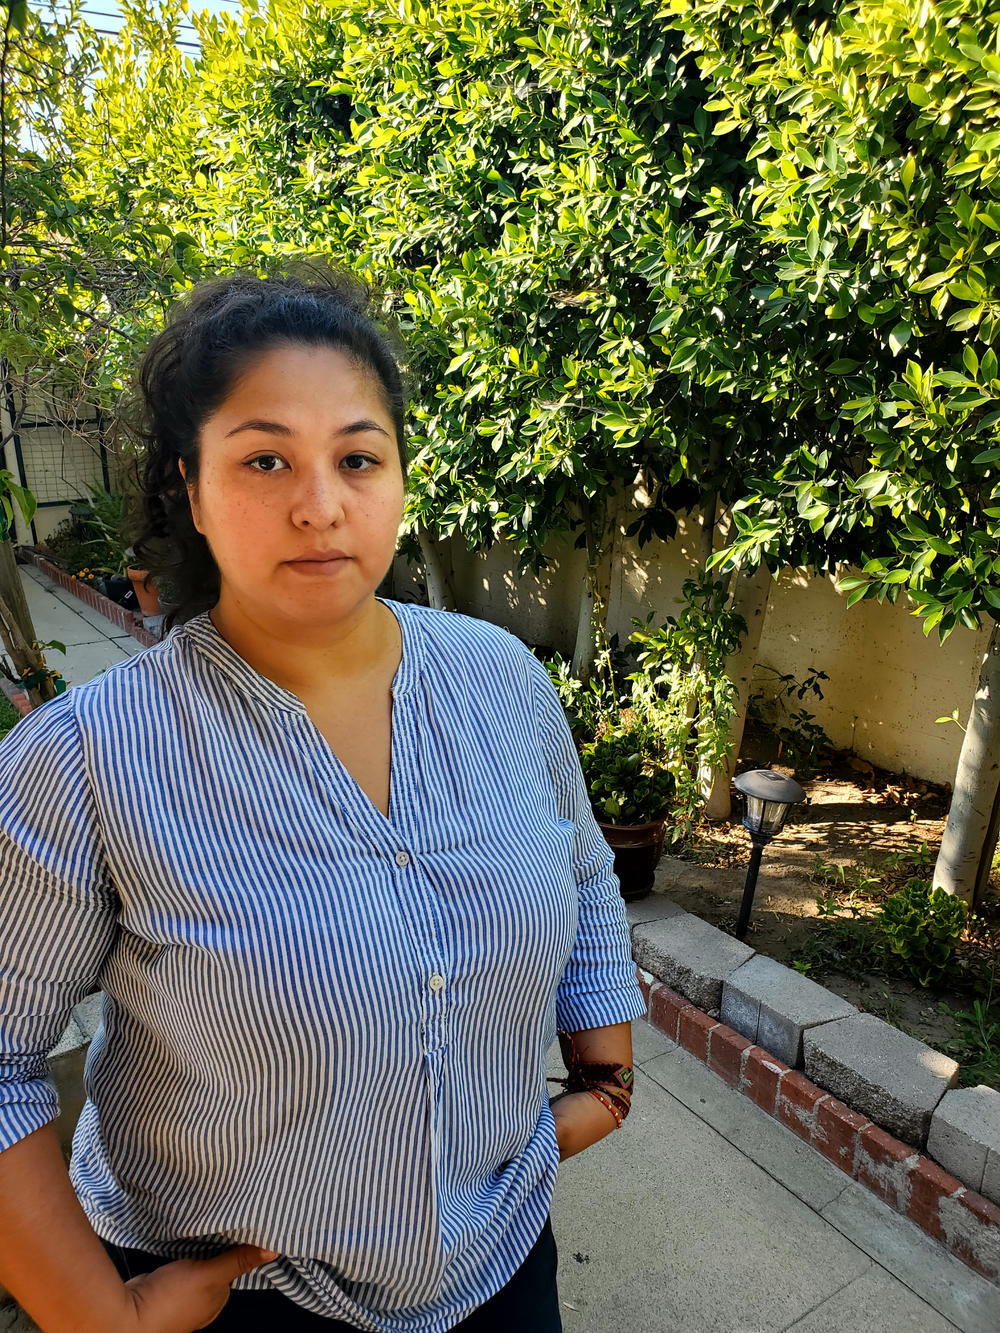 Andrea Iaroc at the home she rents in Los Angeles. She says she may leave the U.S. and move to Colombia, where she has family, so she can afford to buy a house.